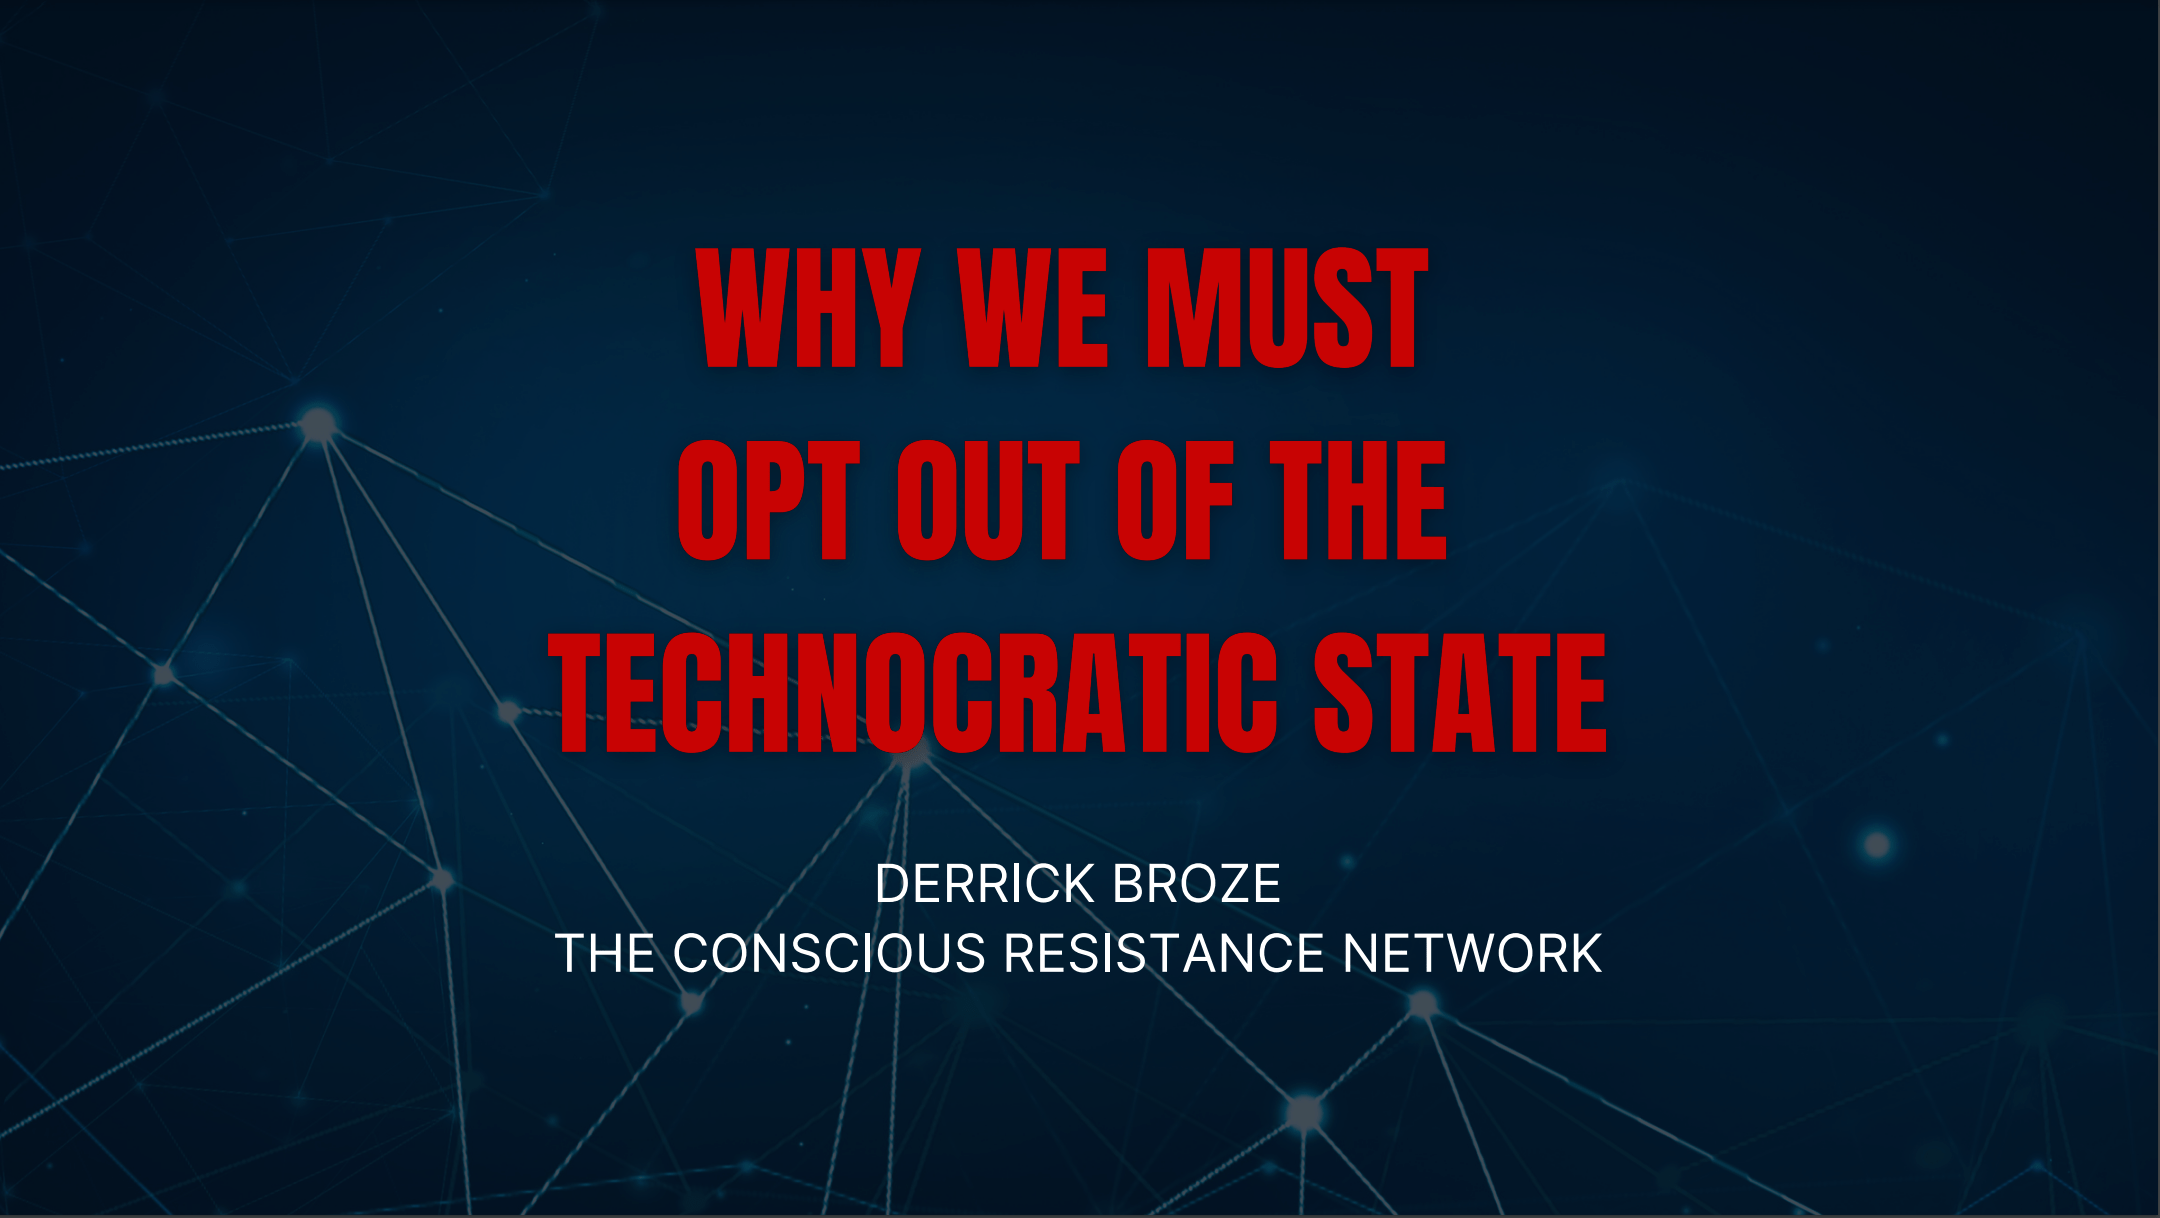 Why we must opt out of the technocratic society